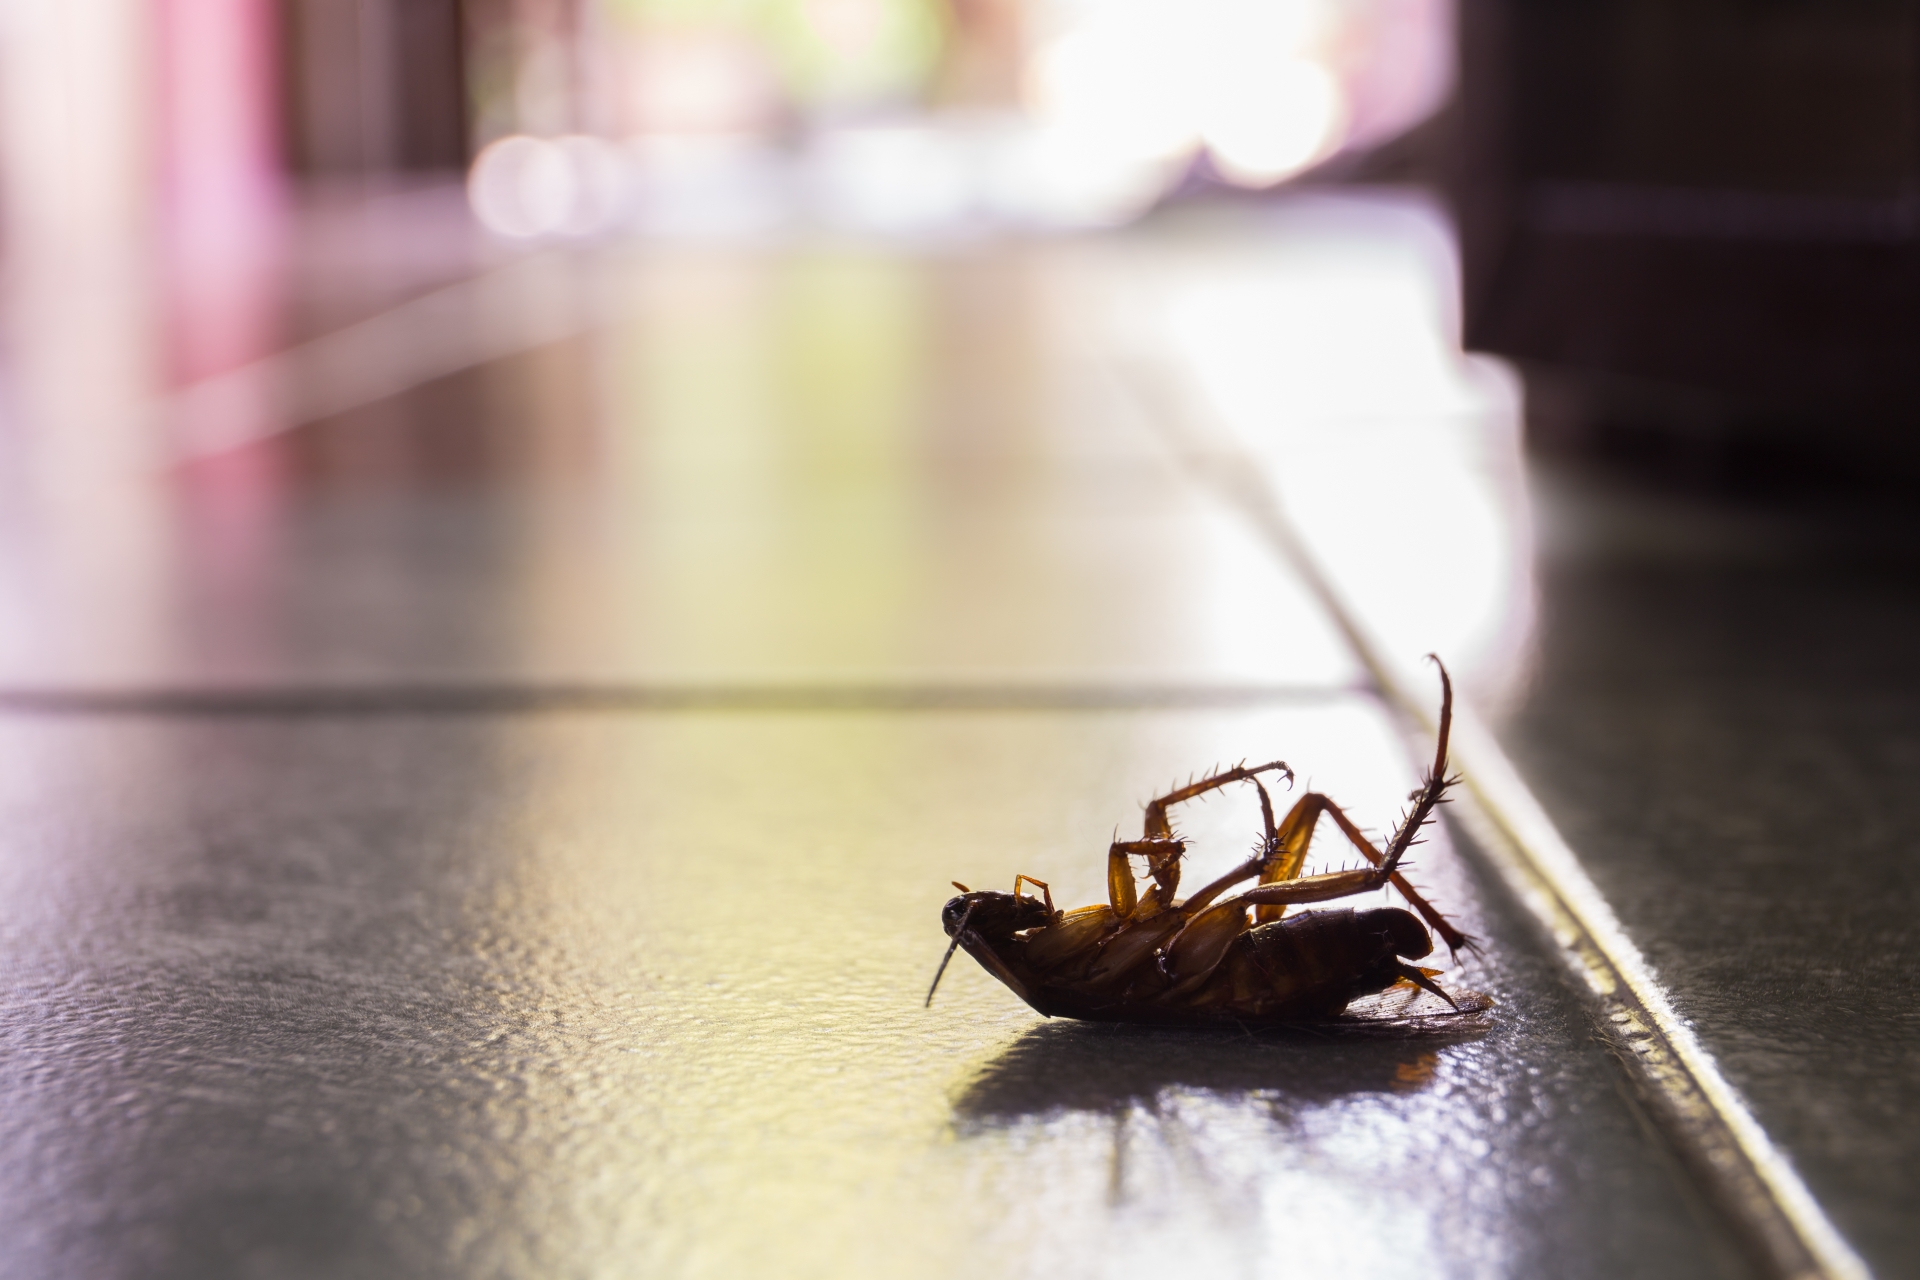 Cockroach Control, Pest Control in Holland Park, W11. Call Now 020 8166 9746